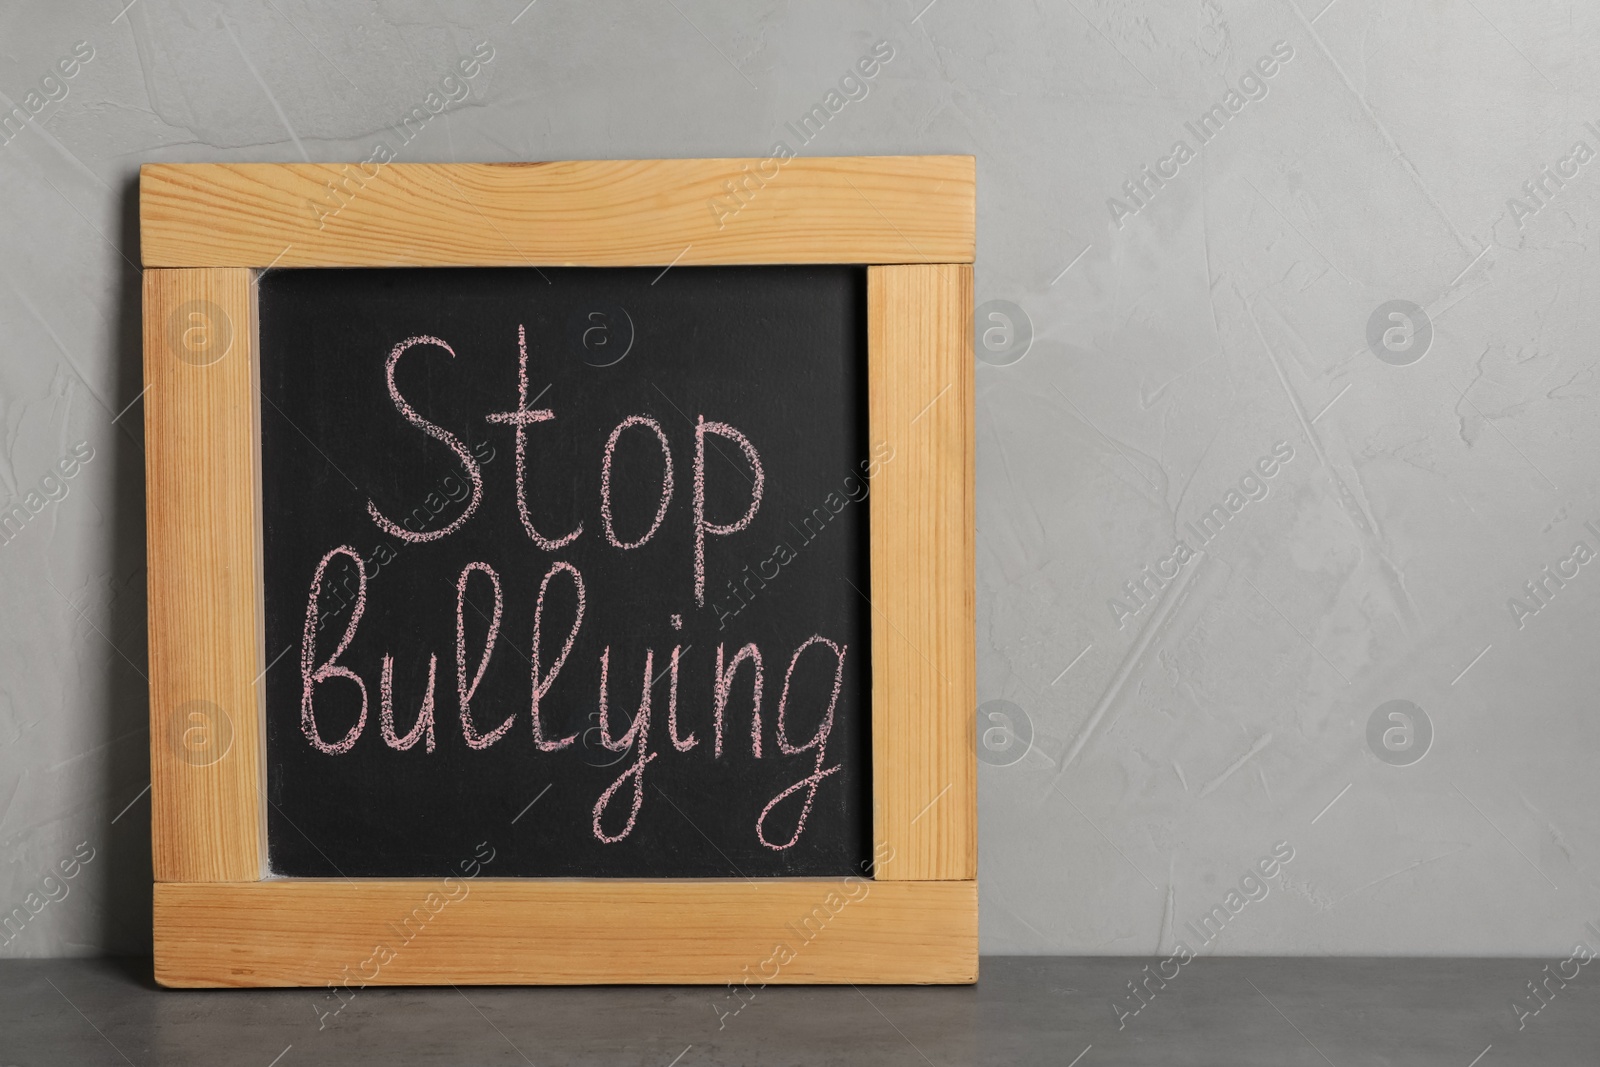 Photo of Blackboard with phrase Stop Bullying on table near grey wall